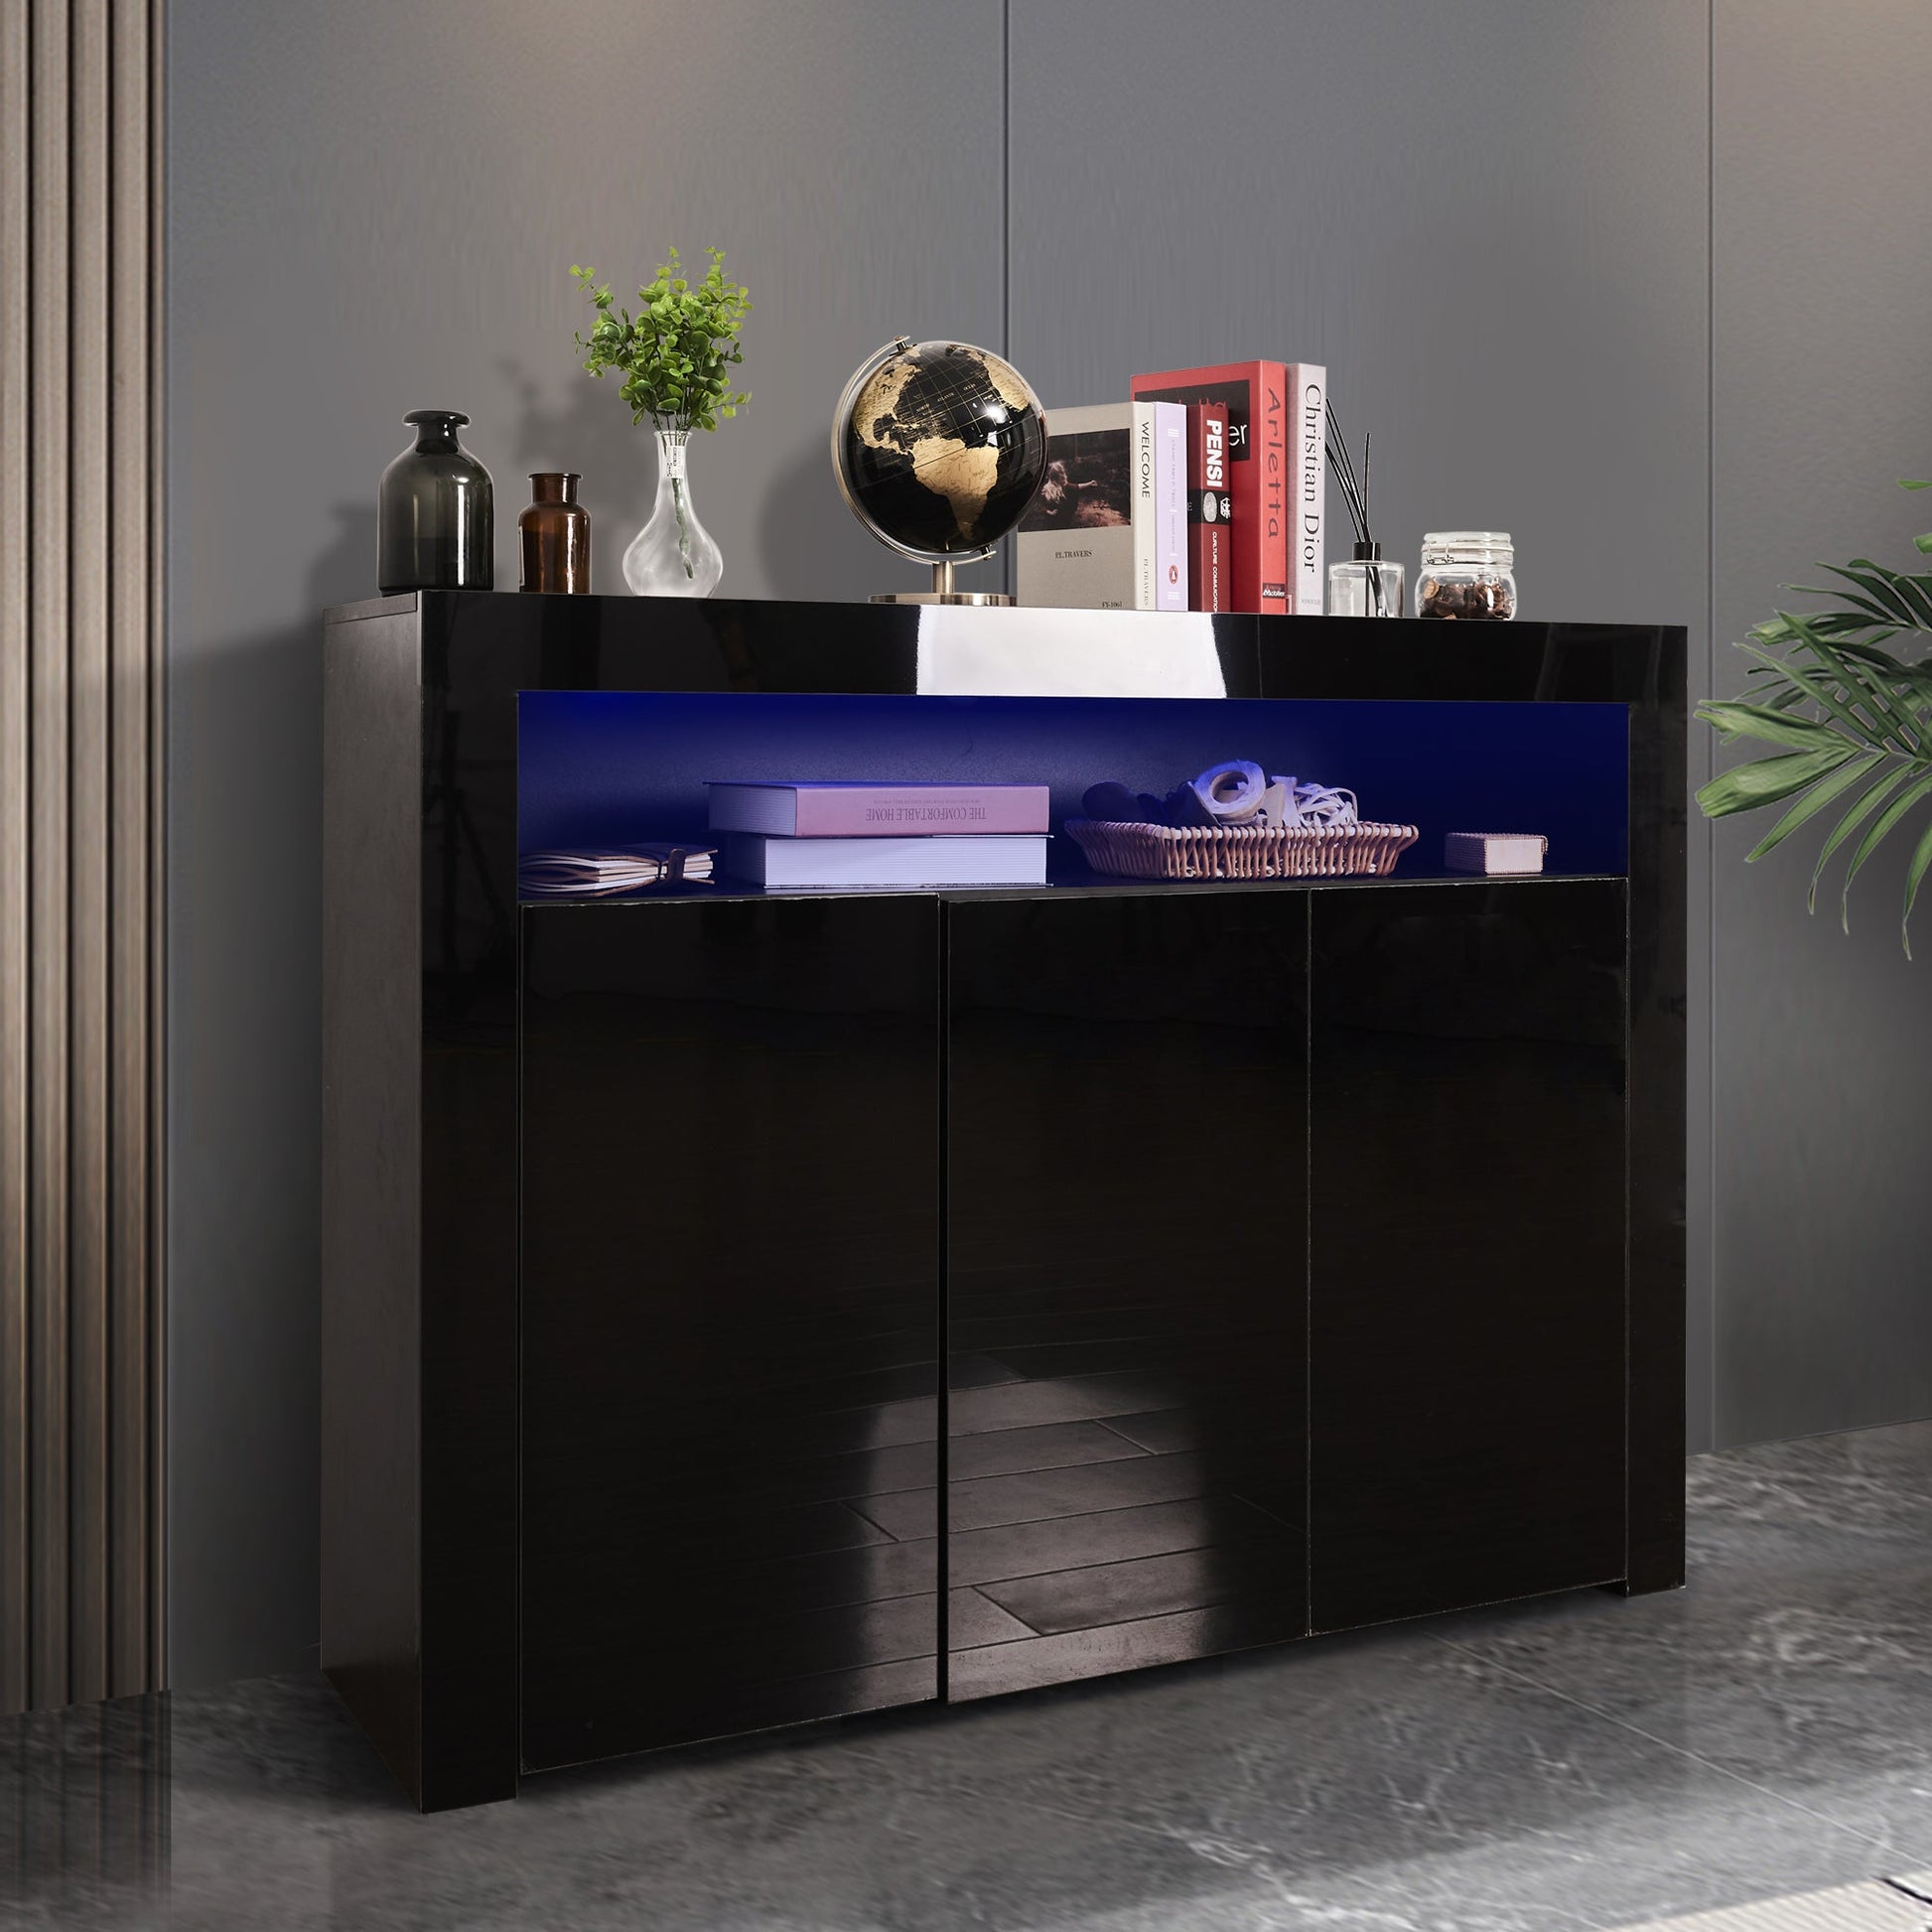 Living Room Sideboard Storage Cabinet Black High Gloss with LED Light, Modern Kitchen Unit Cupboard Buffet Wooden Storage Display Cabinet TV Stand with 3 Doors for Hallway Dining Room - Demine Essentials